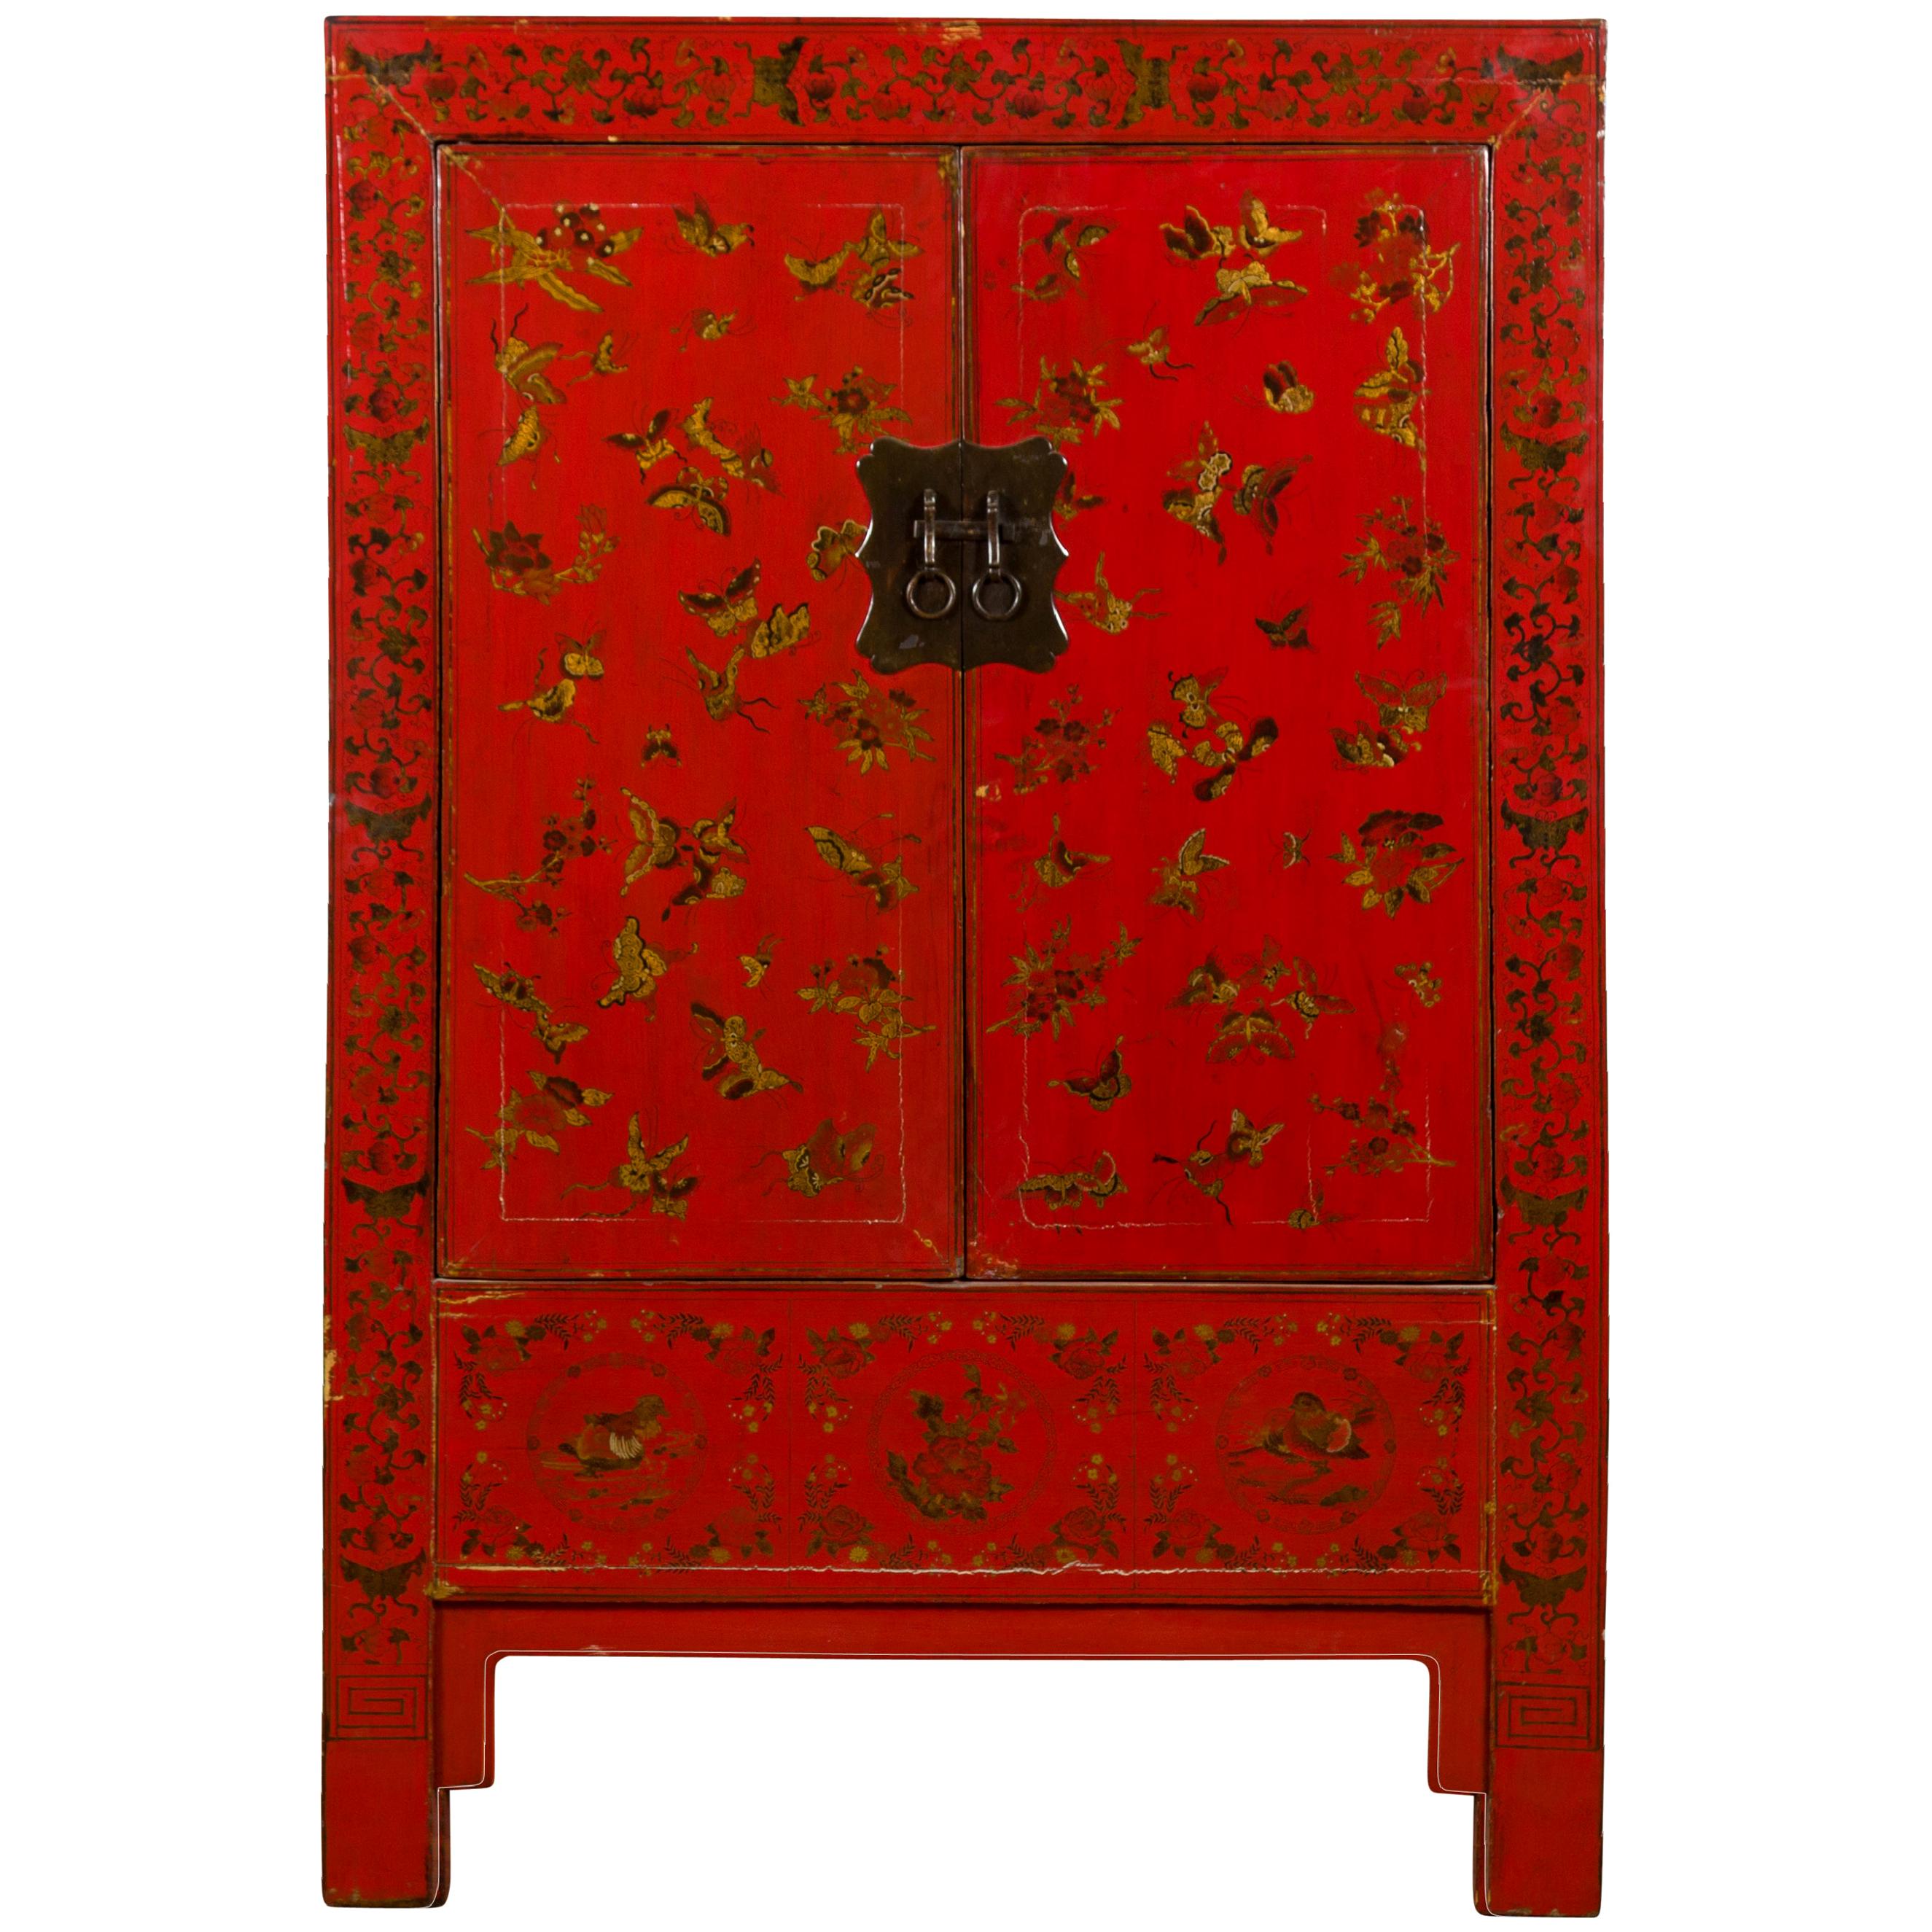 Chinese Red Lacquered 19th Century Qing Dynasty Cabinet with Gilt Chinoiseries